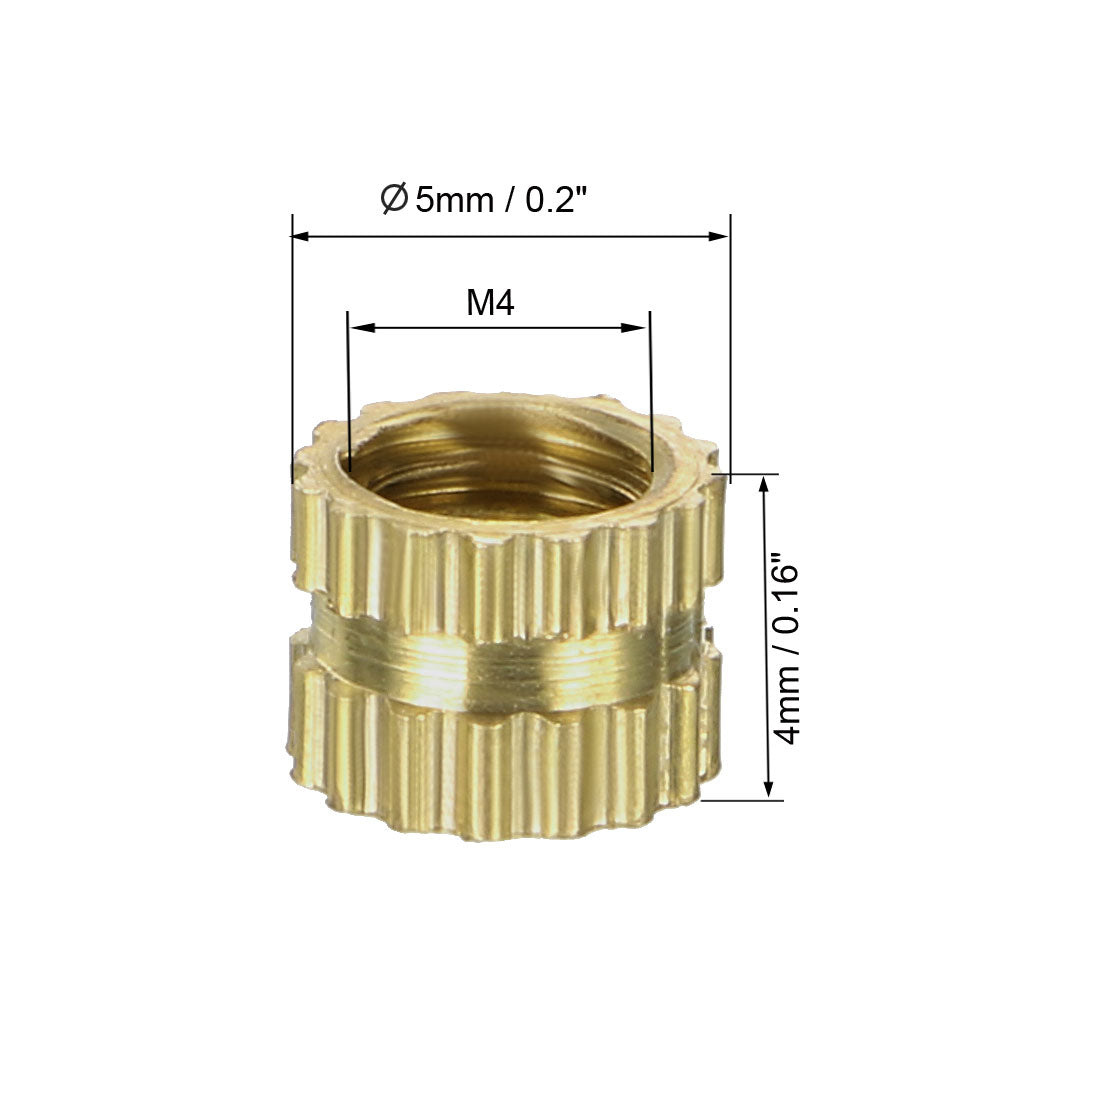 uxcell Uxcell Knurled Insert Nuts, Female Thread Threaded Insert Embedment Nut for 3D Printer